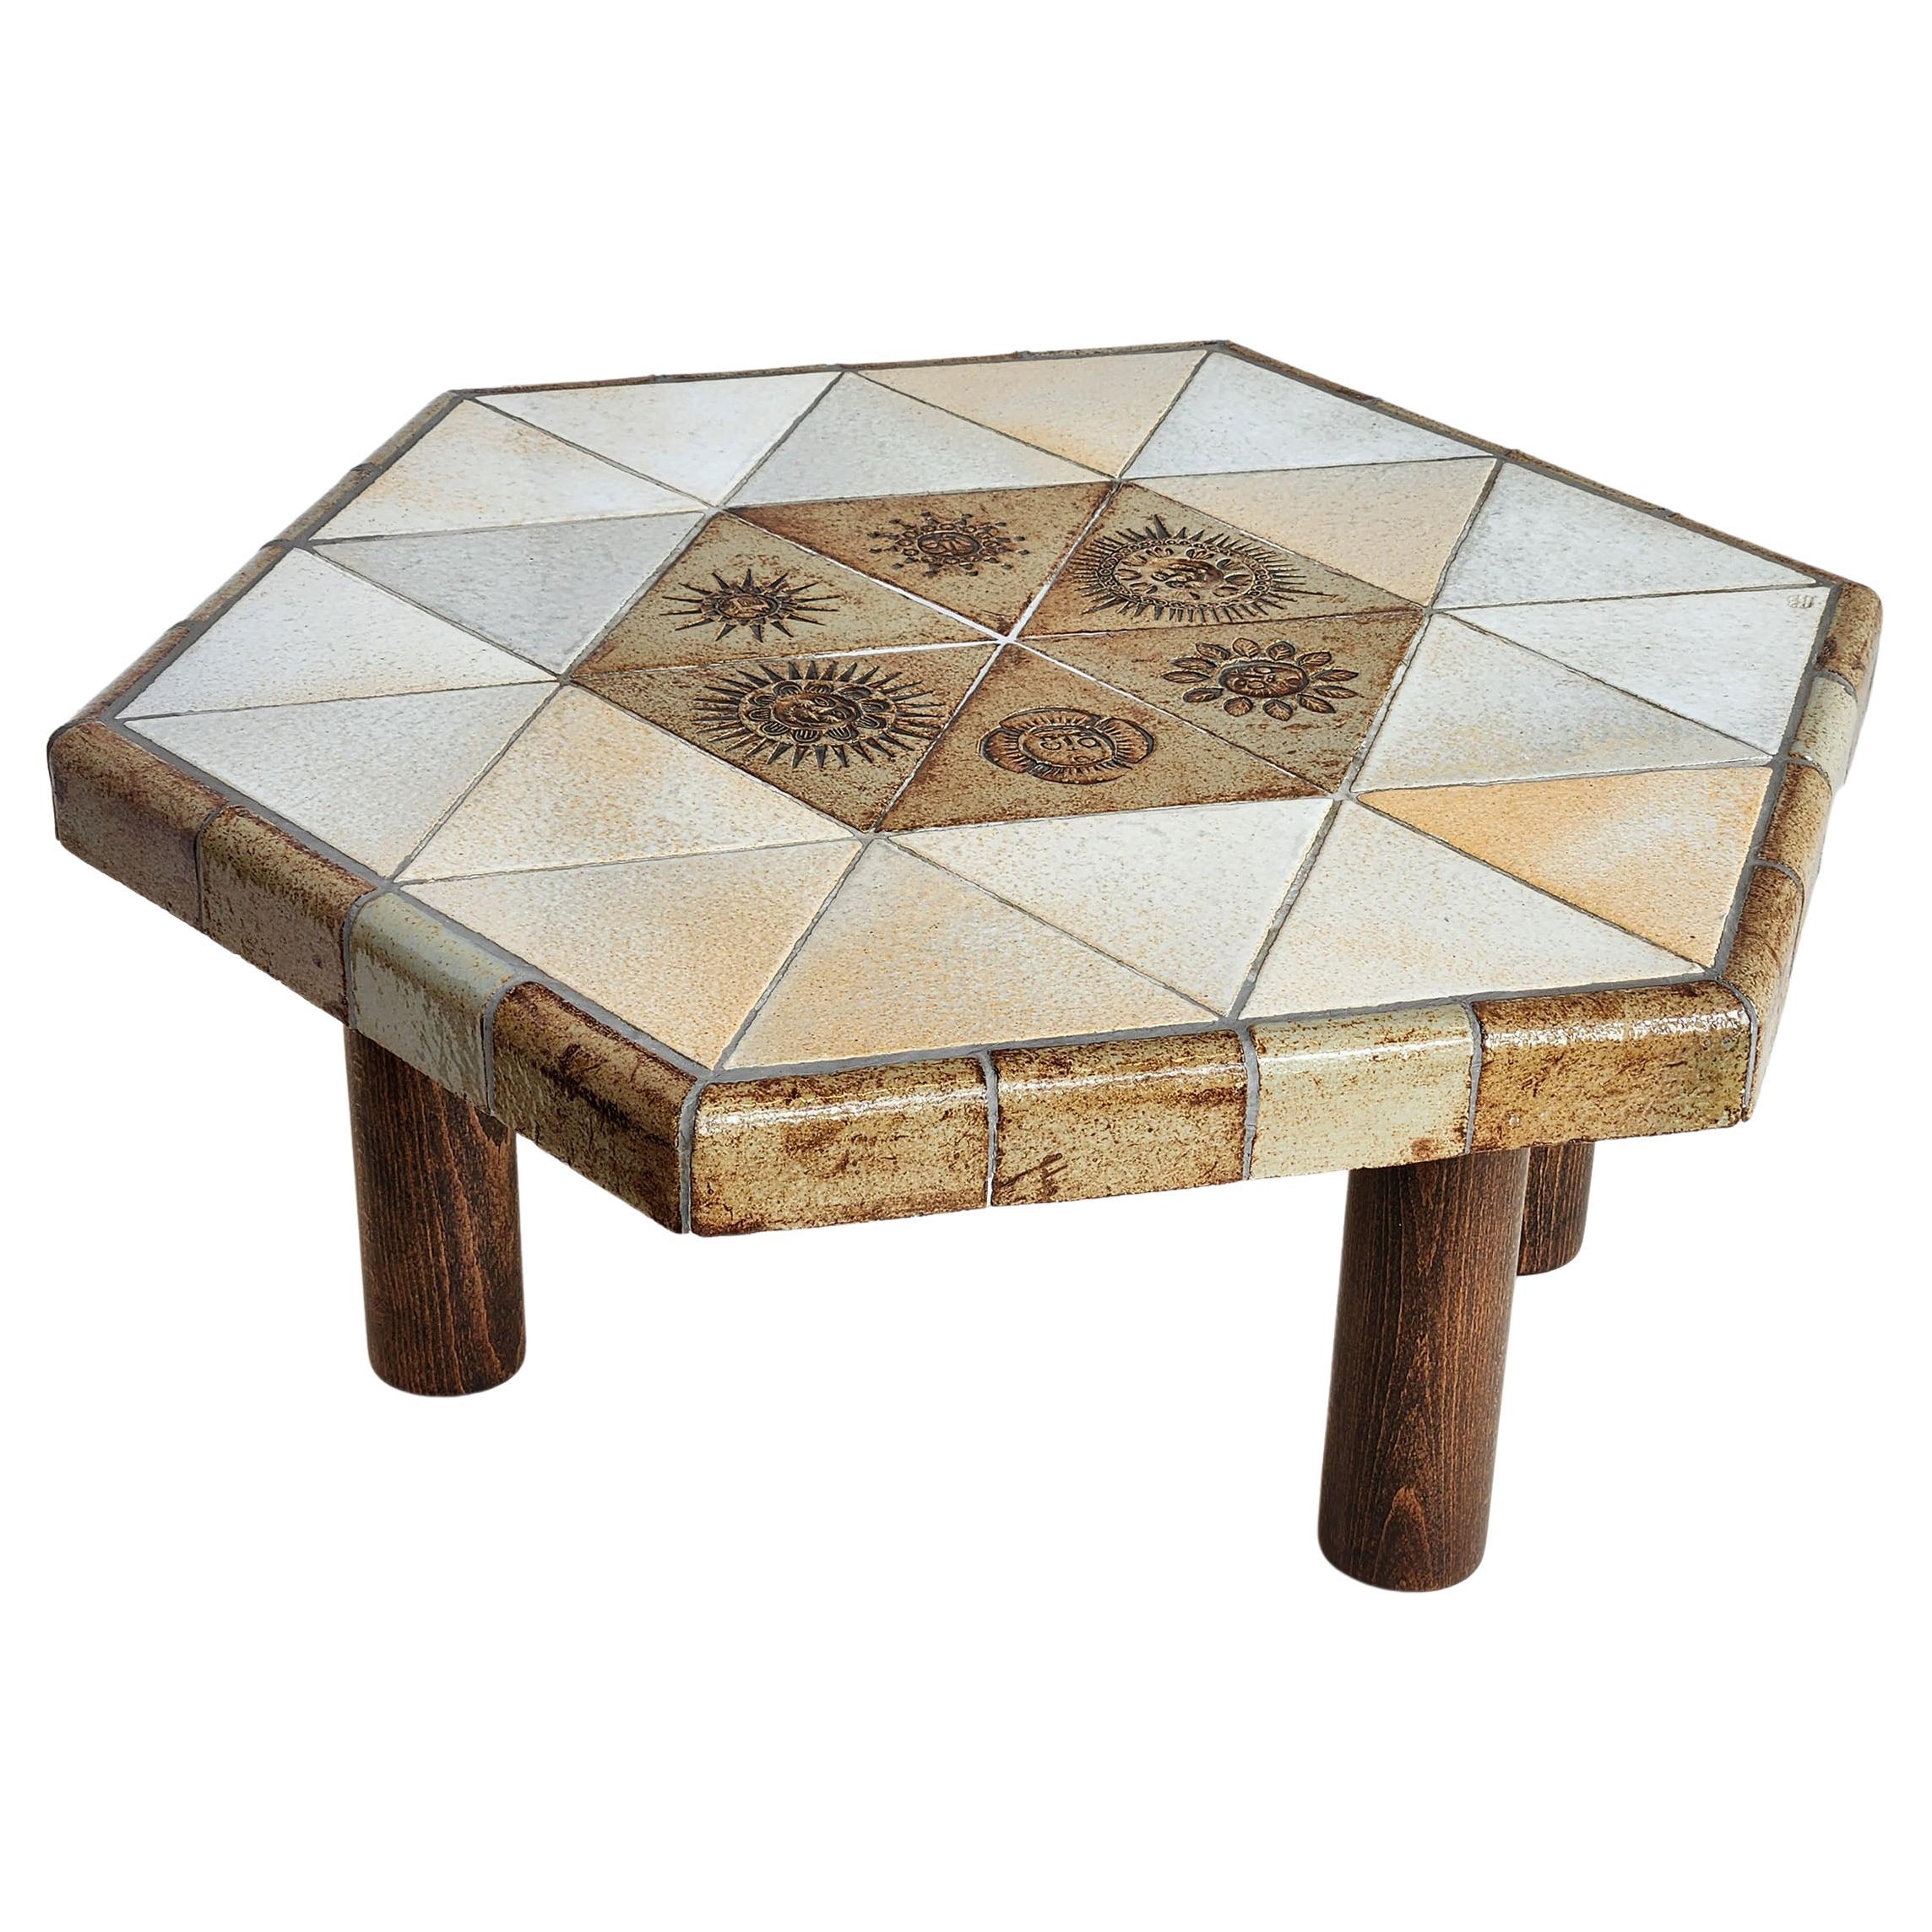 Roger Capron - Vintage Hexagonal Coffee Table with Ceramic Tiles on Wood Legs 